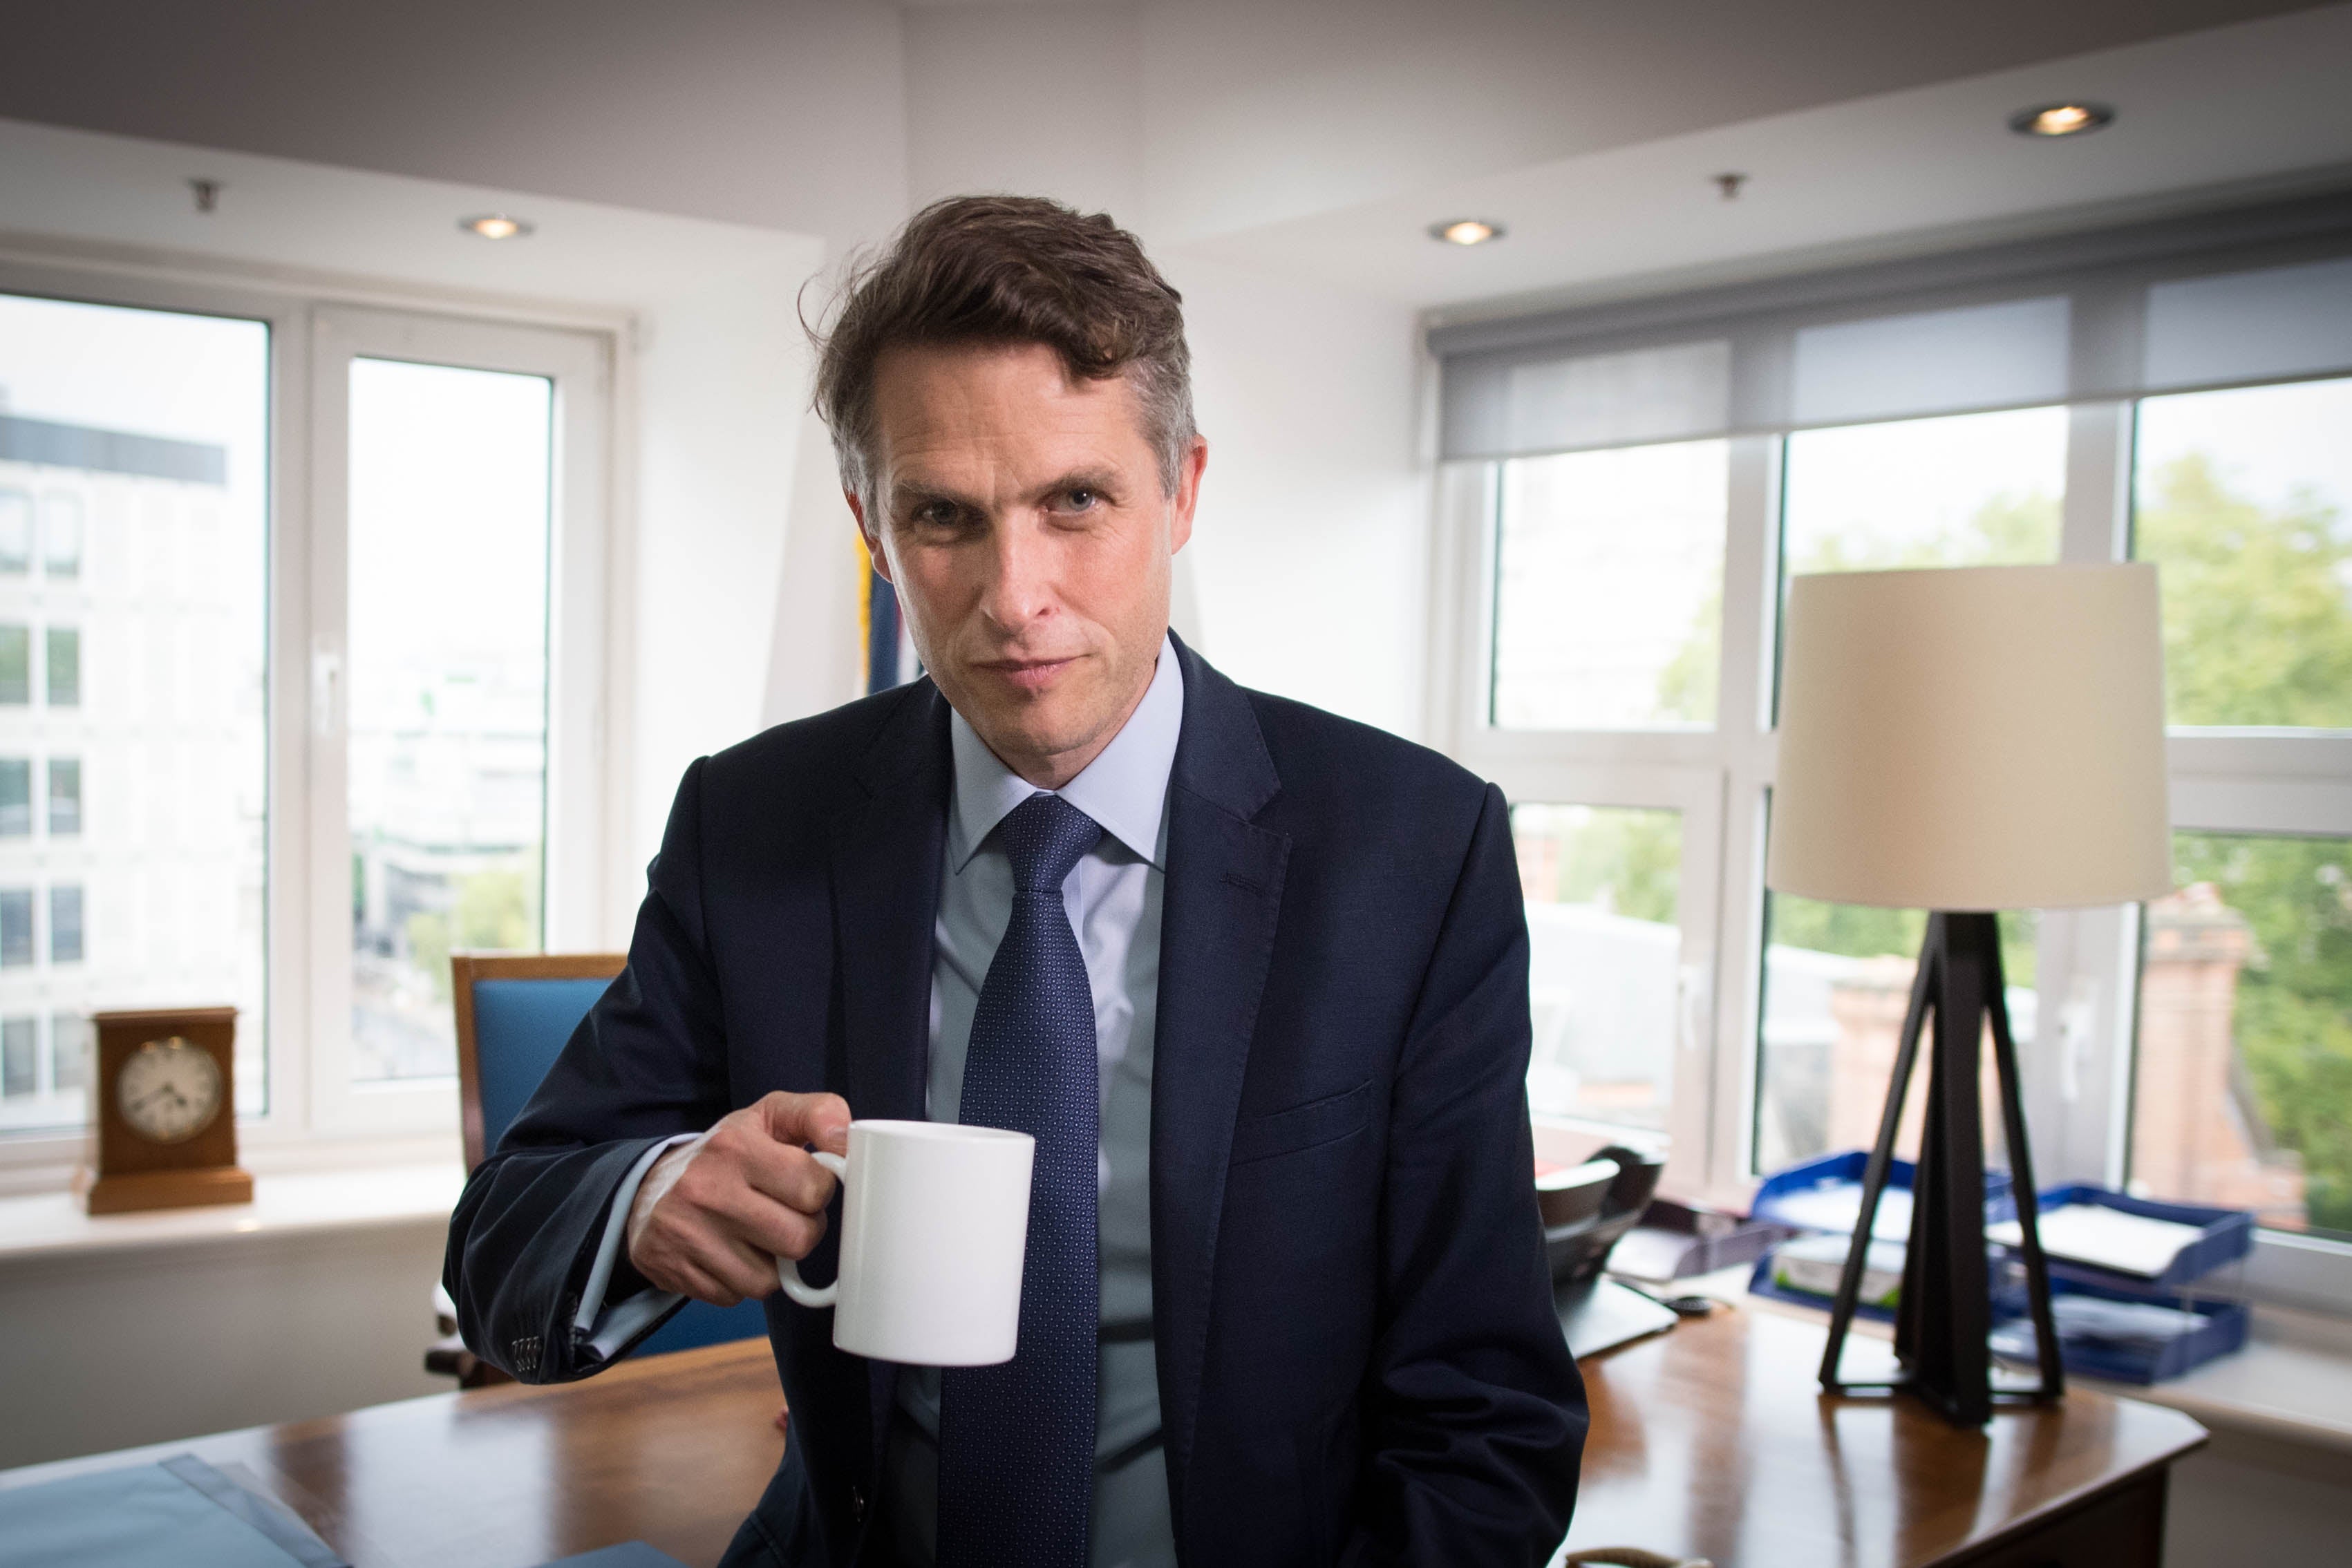 Gavin Williamson is being knighted